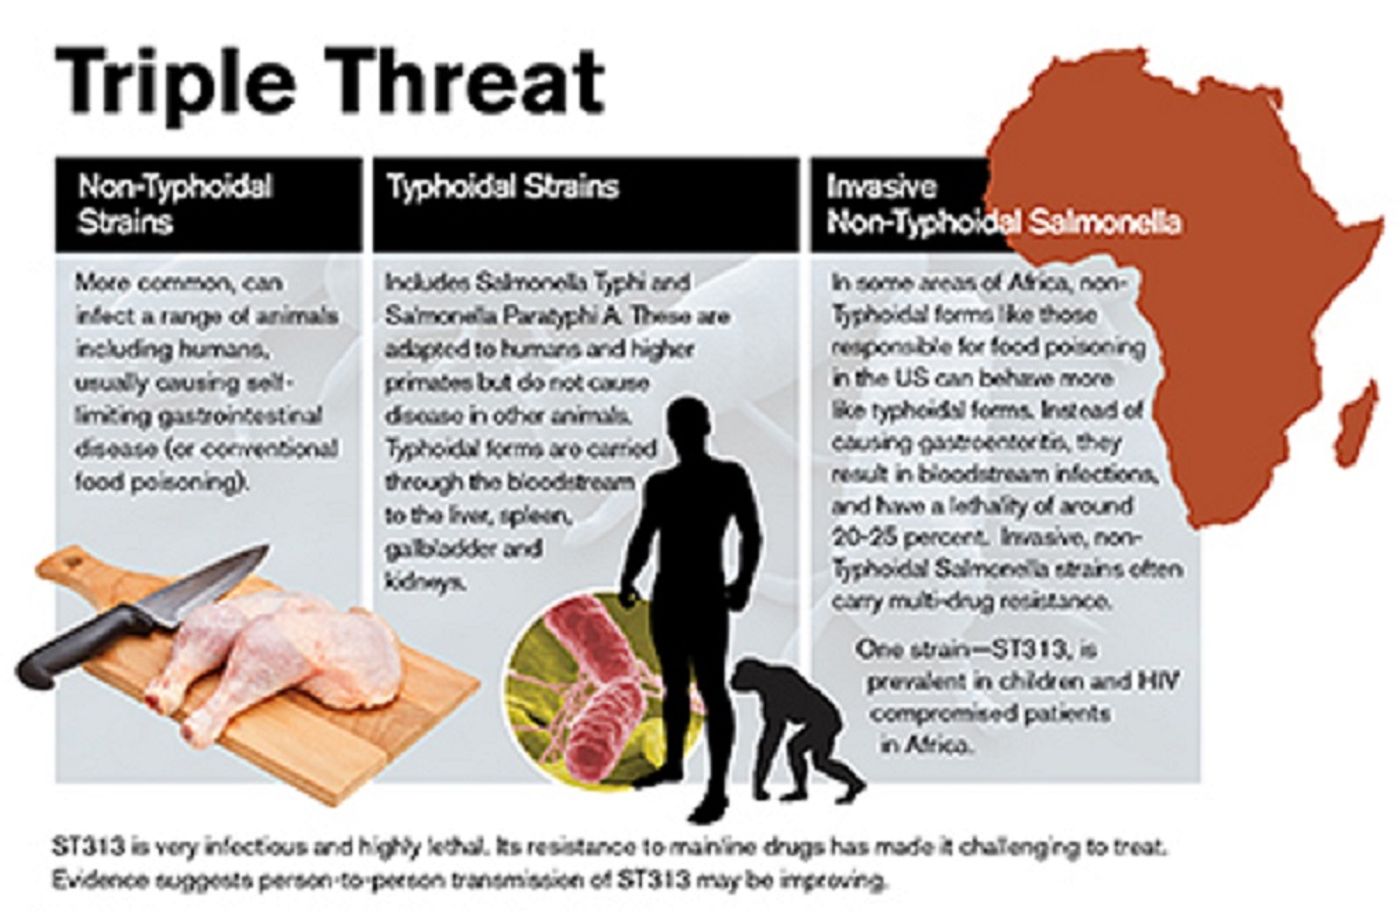 Showing the difference between Typhoidal, nonTyphoidal and invasive nonTyphoidal Salmonella